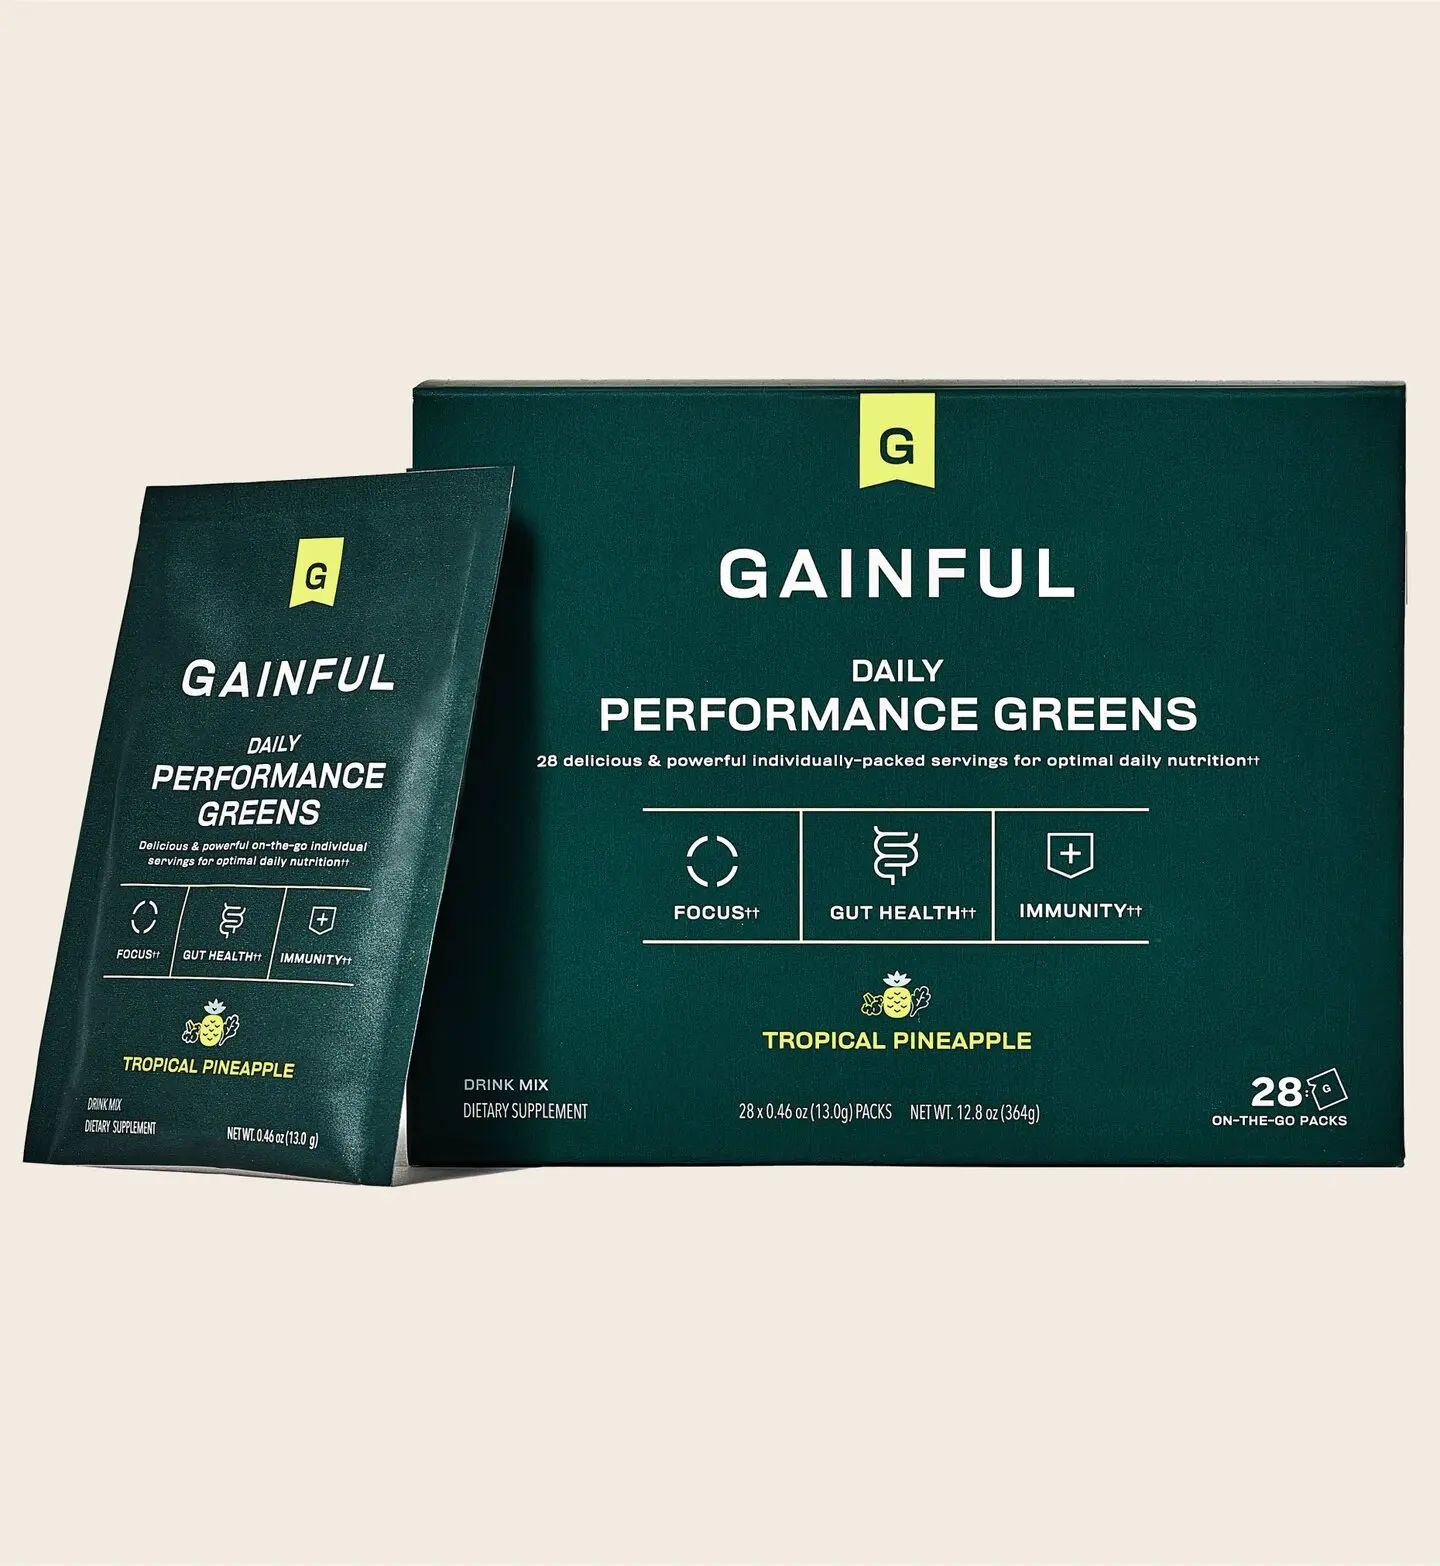 Daily Performance Greens | Gainful